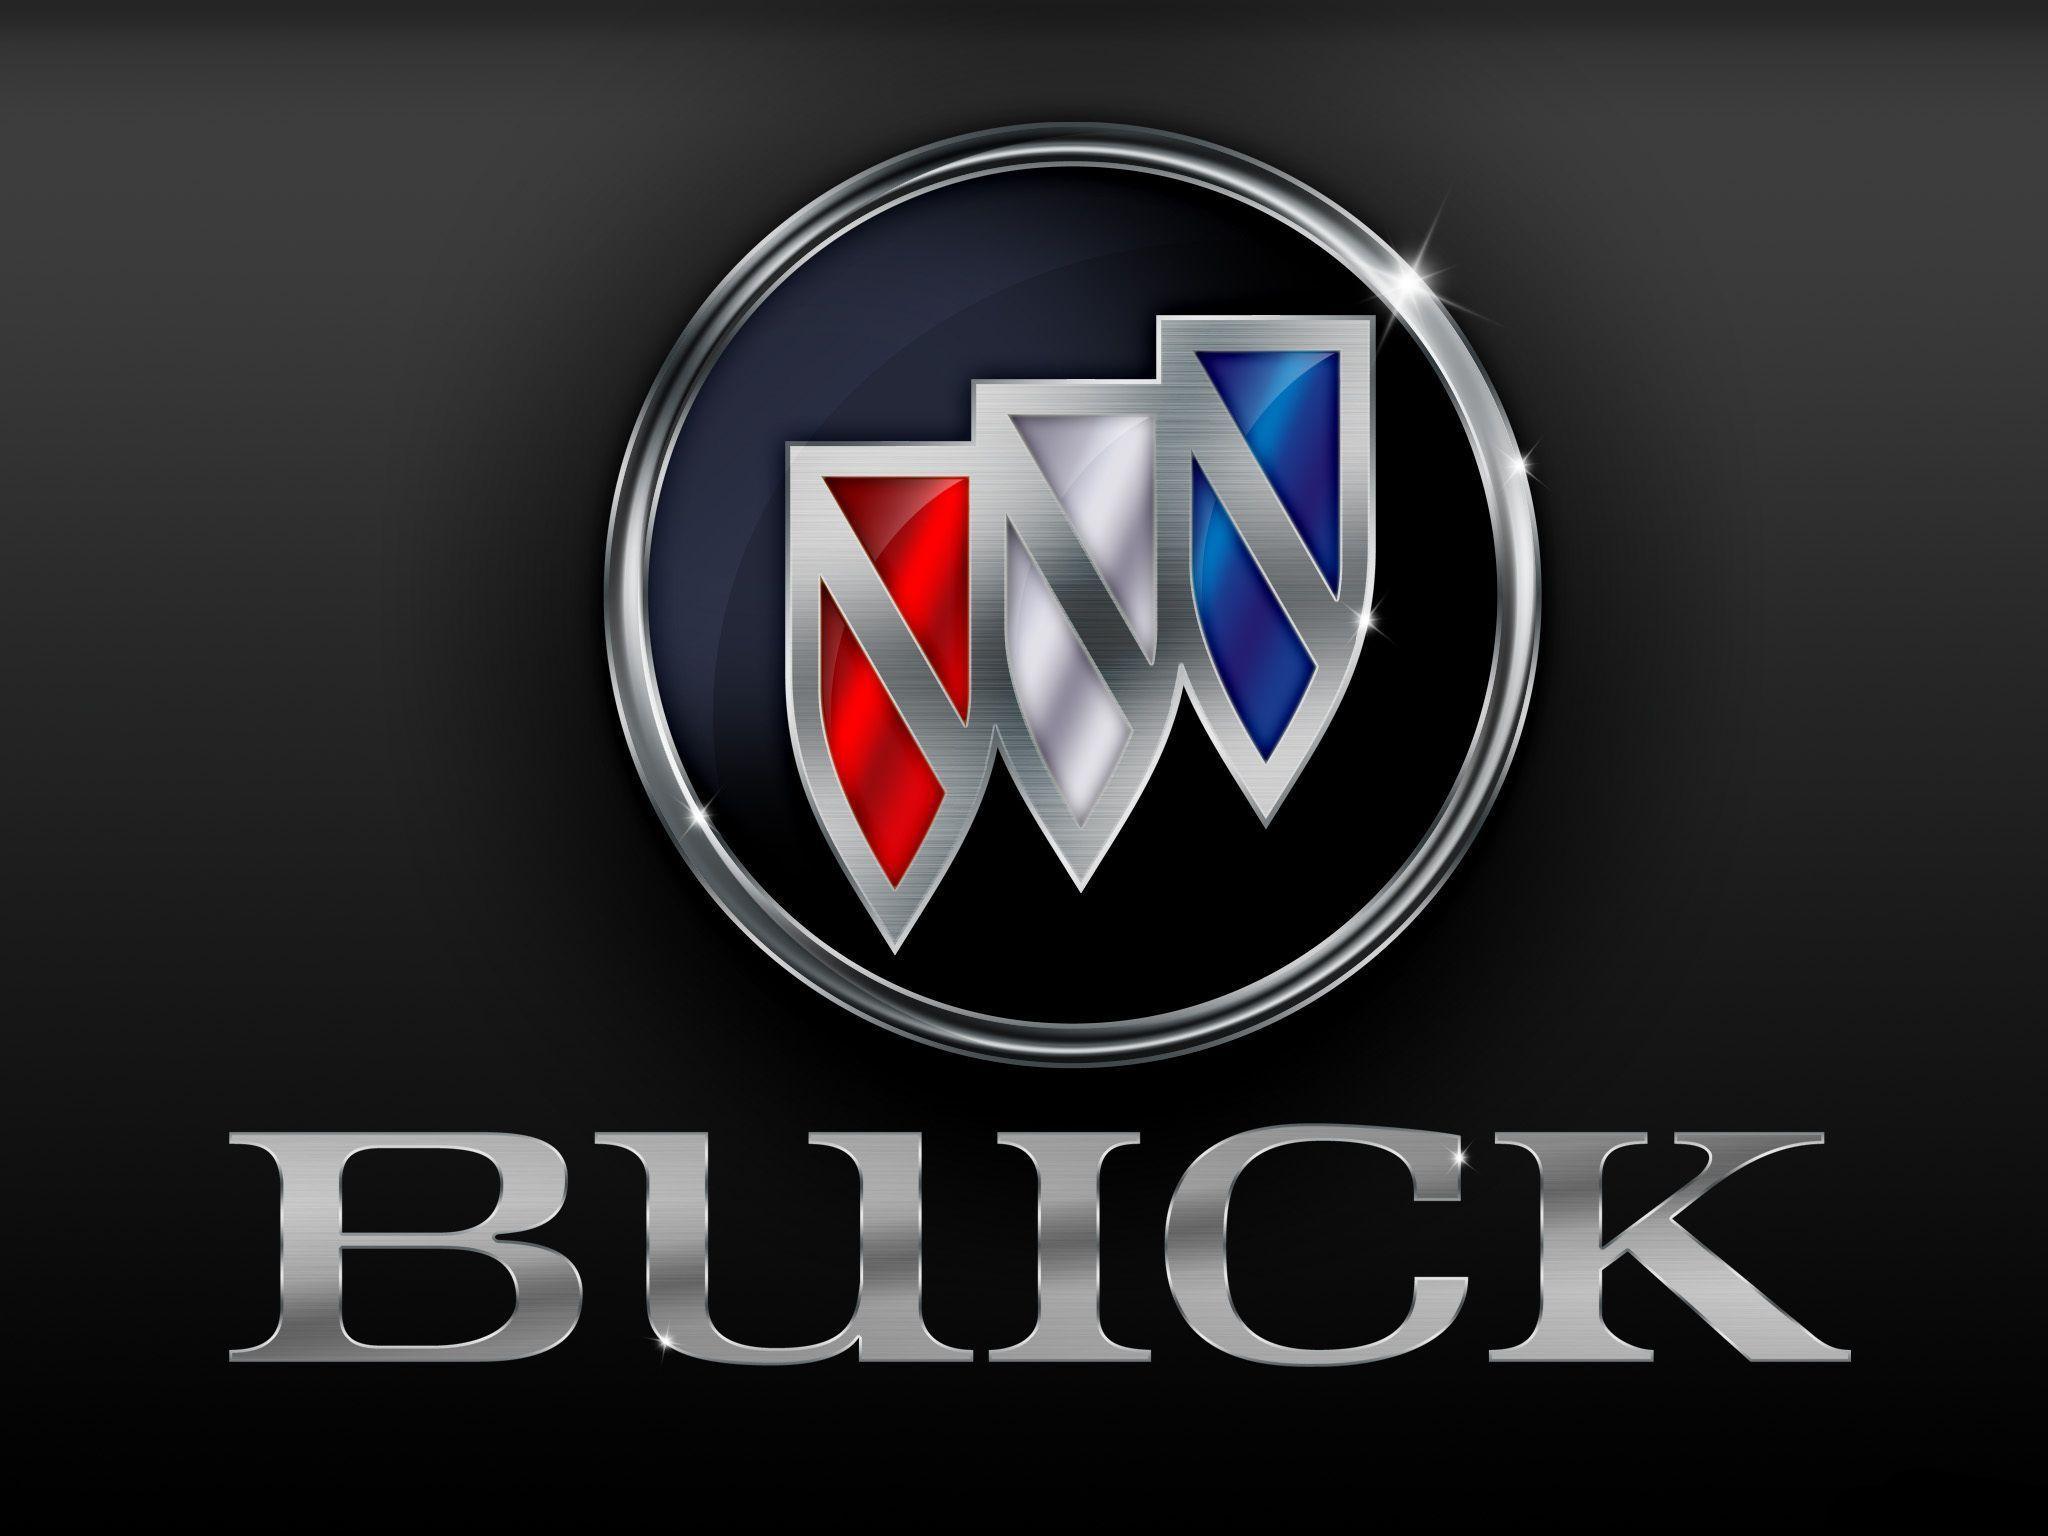 New Buick Logo - Buick Logo, Buick Car Symbol Meaning and History | Car Brand Names.com